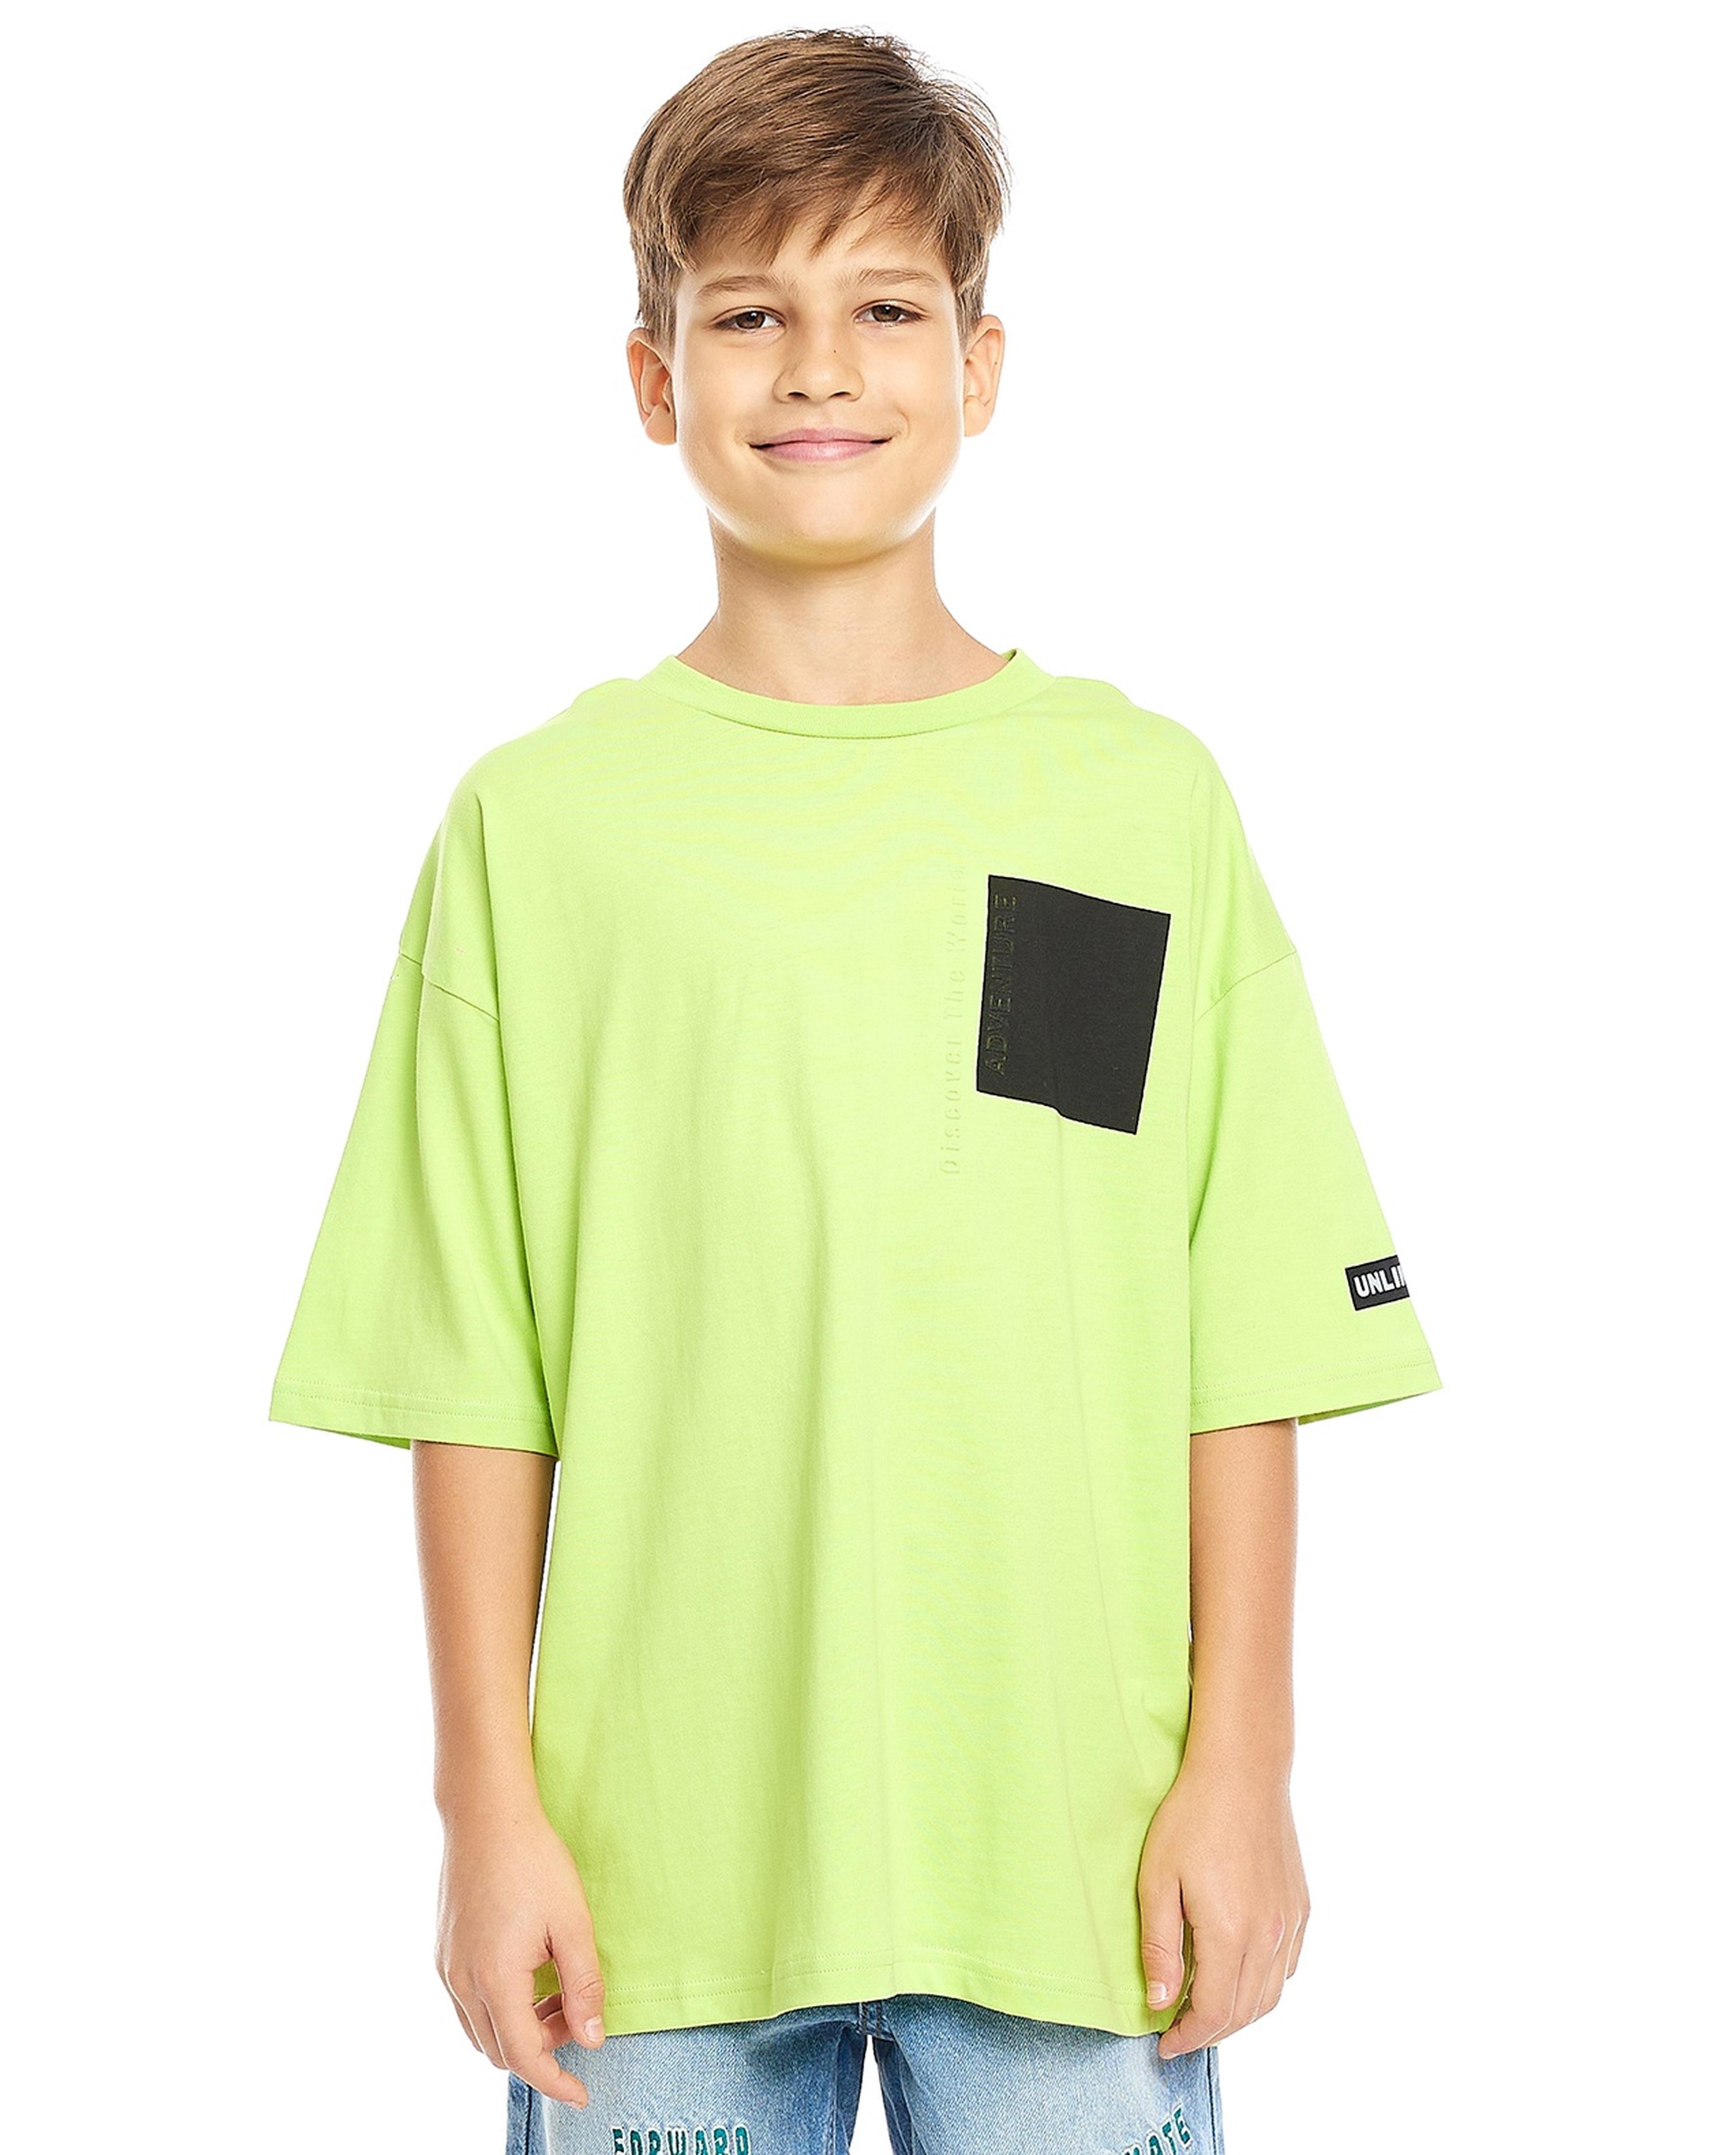 Patch Detail Oversized T-Shirt with Crew Neck and Short Sleeves